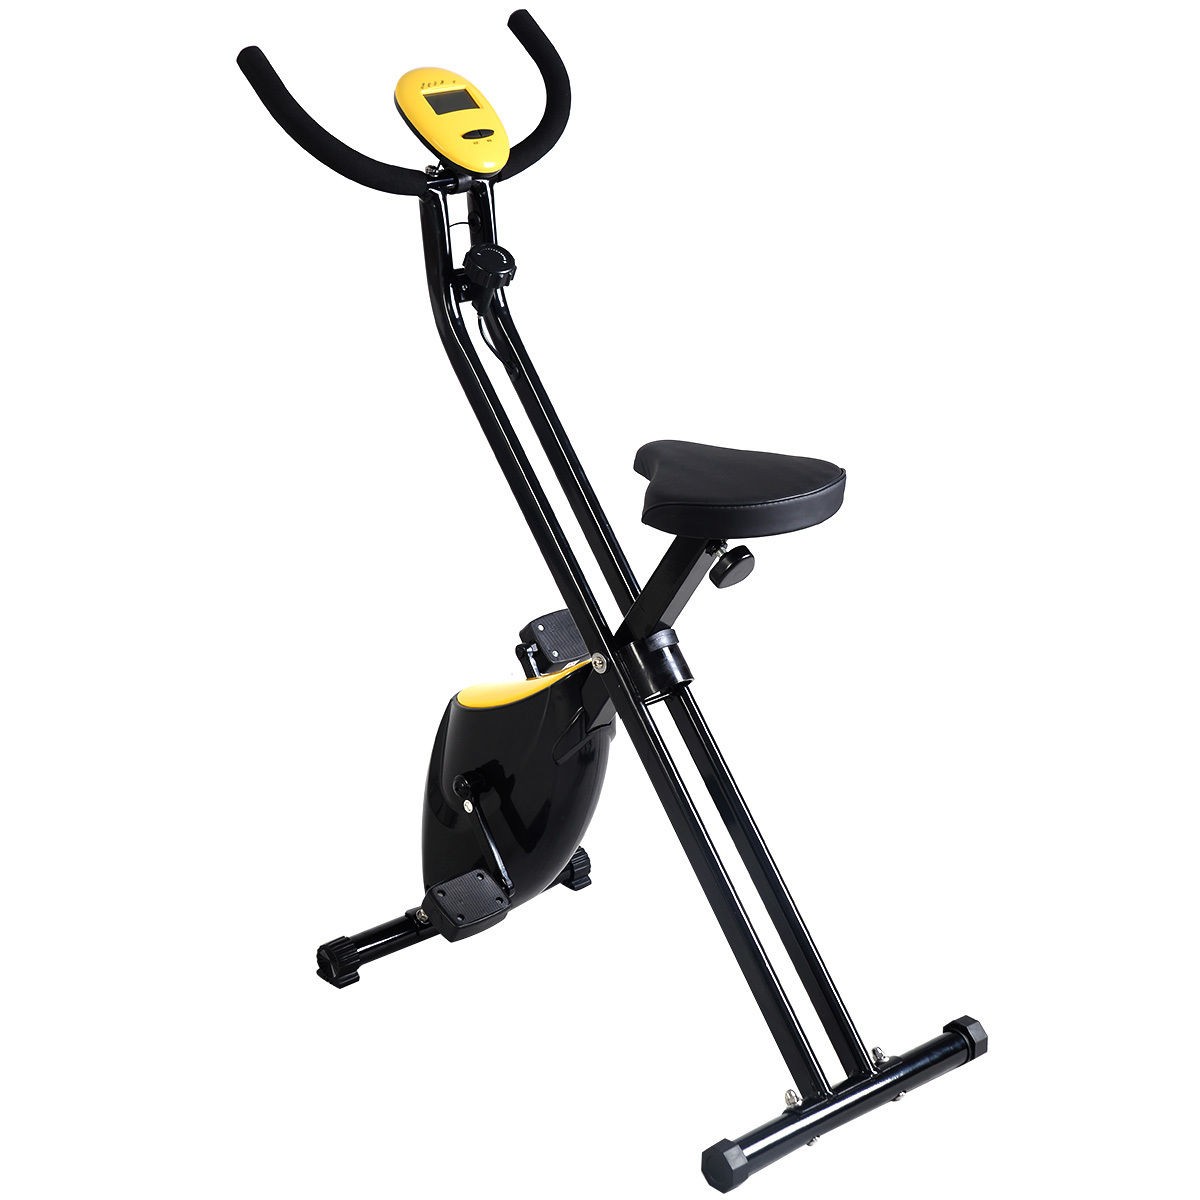 Foldable Compact Indoor Exercise Bike